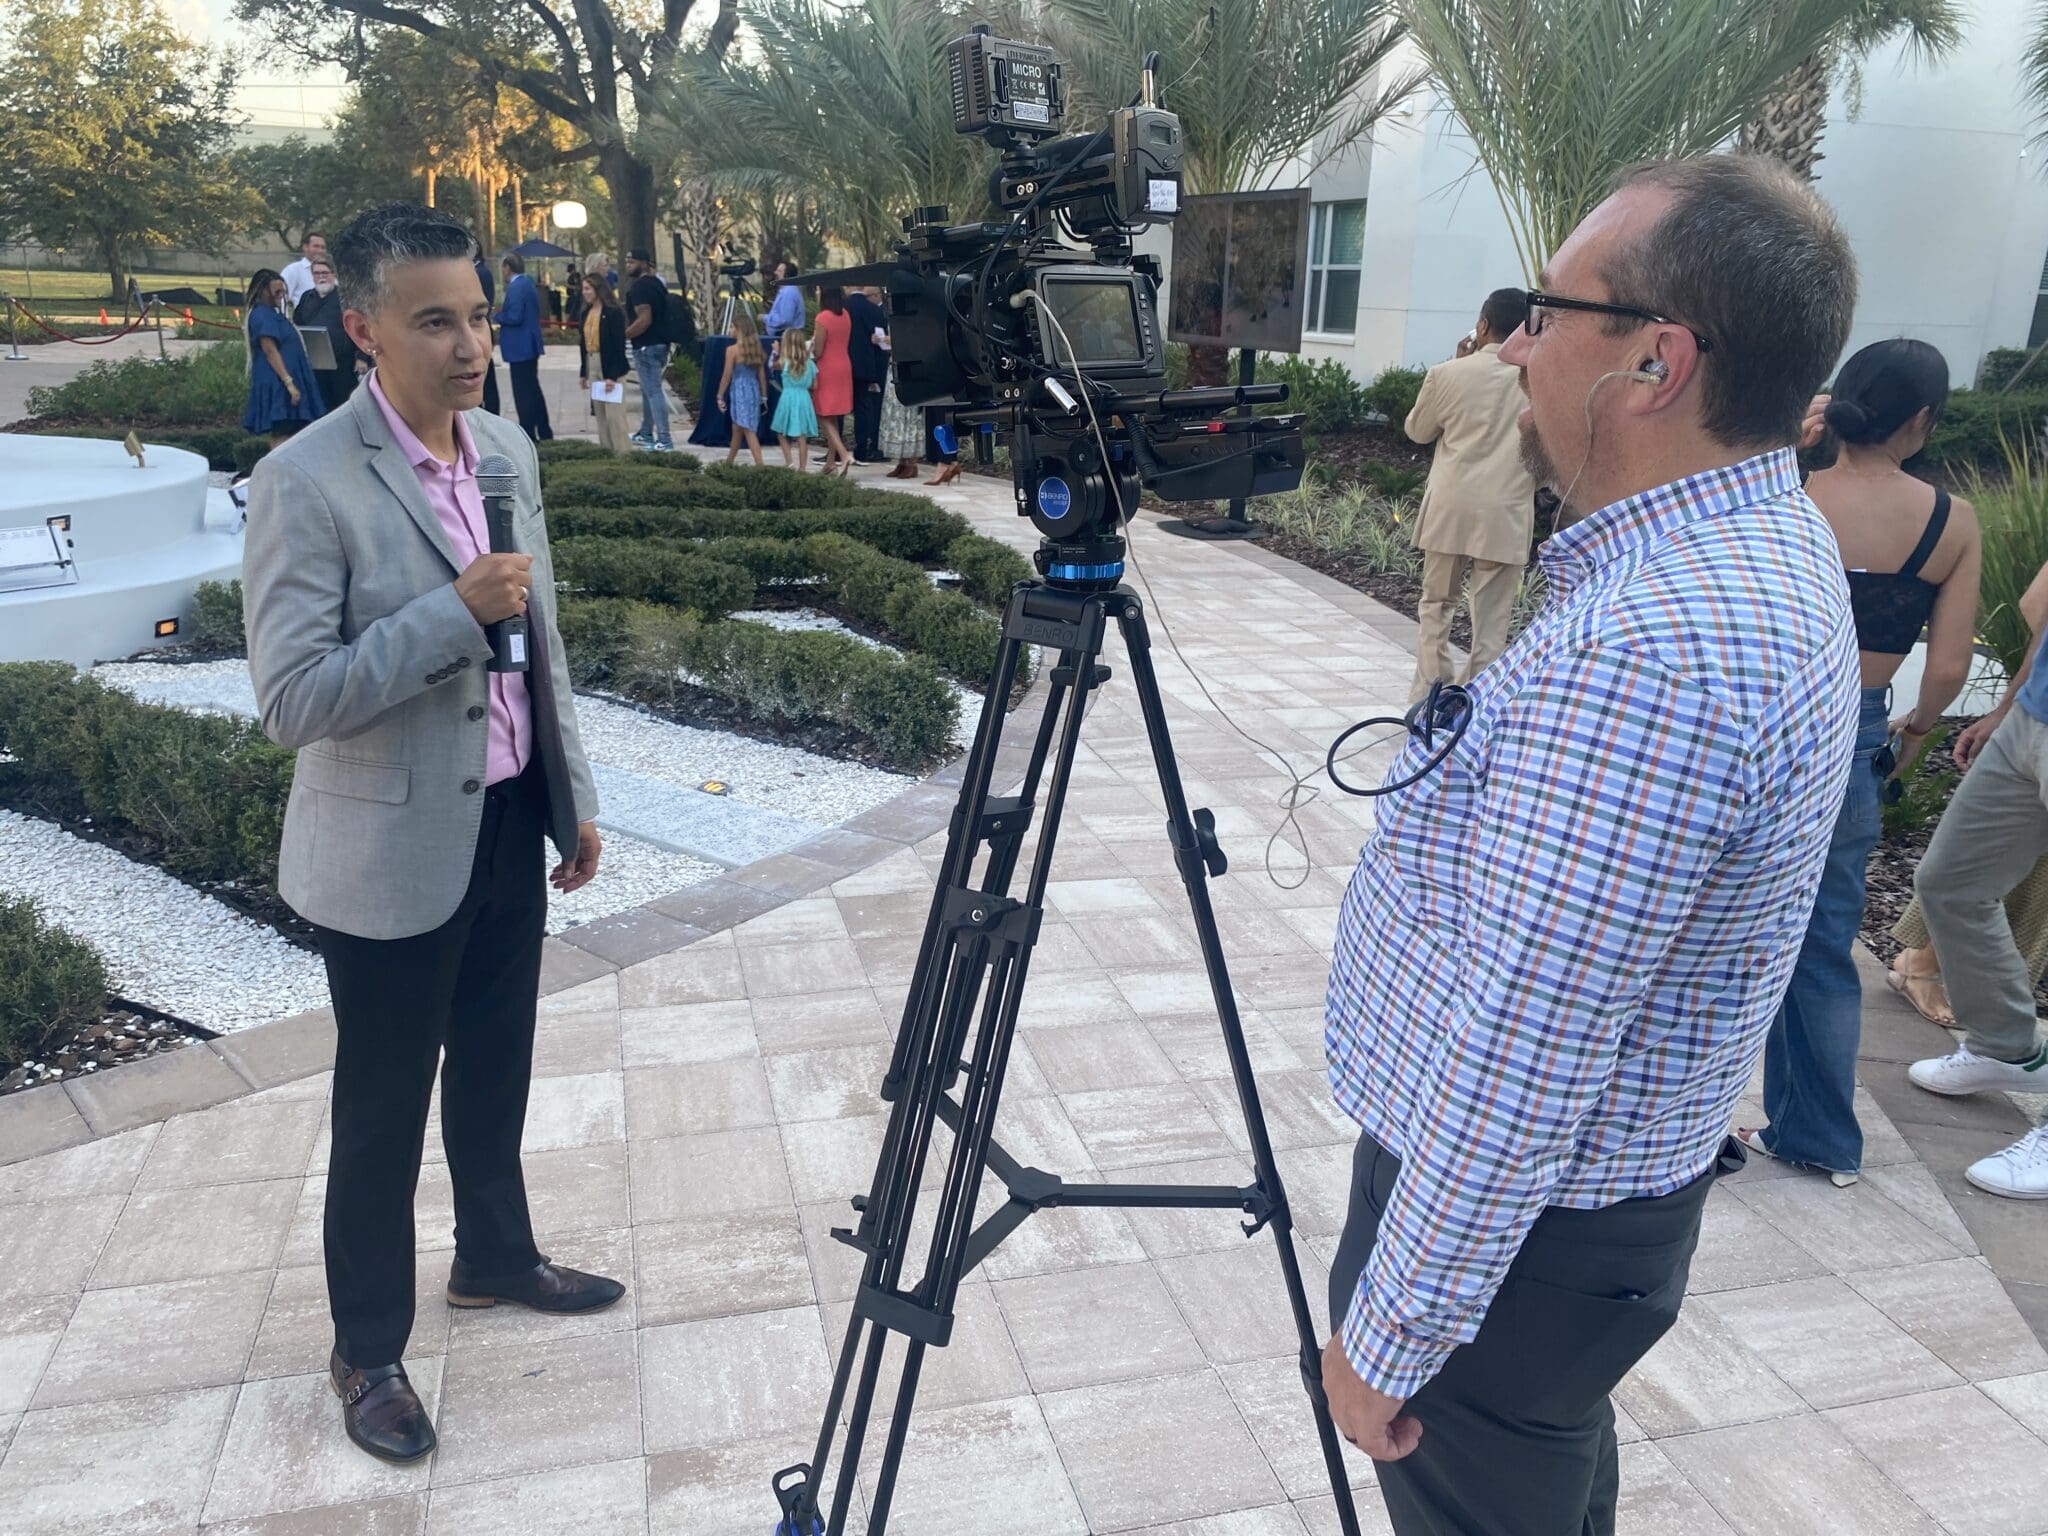 Marcia Alvarado, WGI's Tampa Structural Engineering Market Leader interviews at the unveiling of "Boulevard Flow"